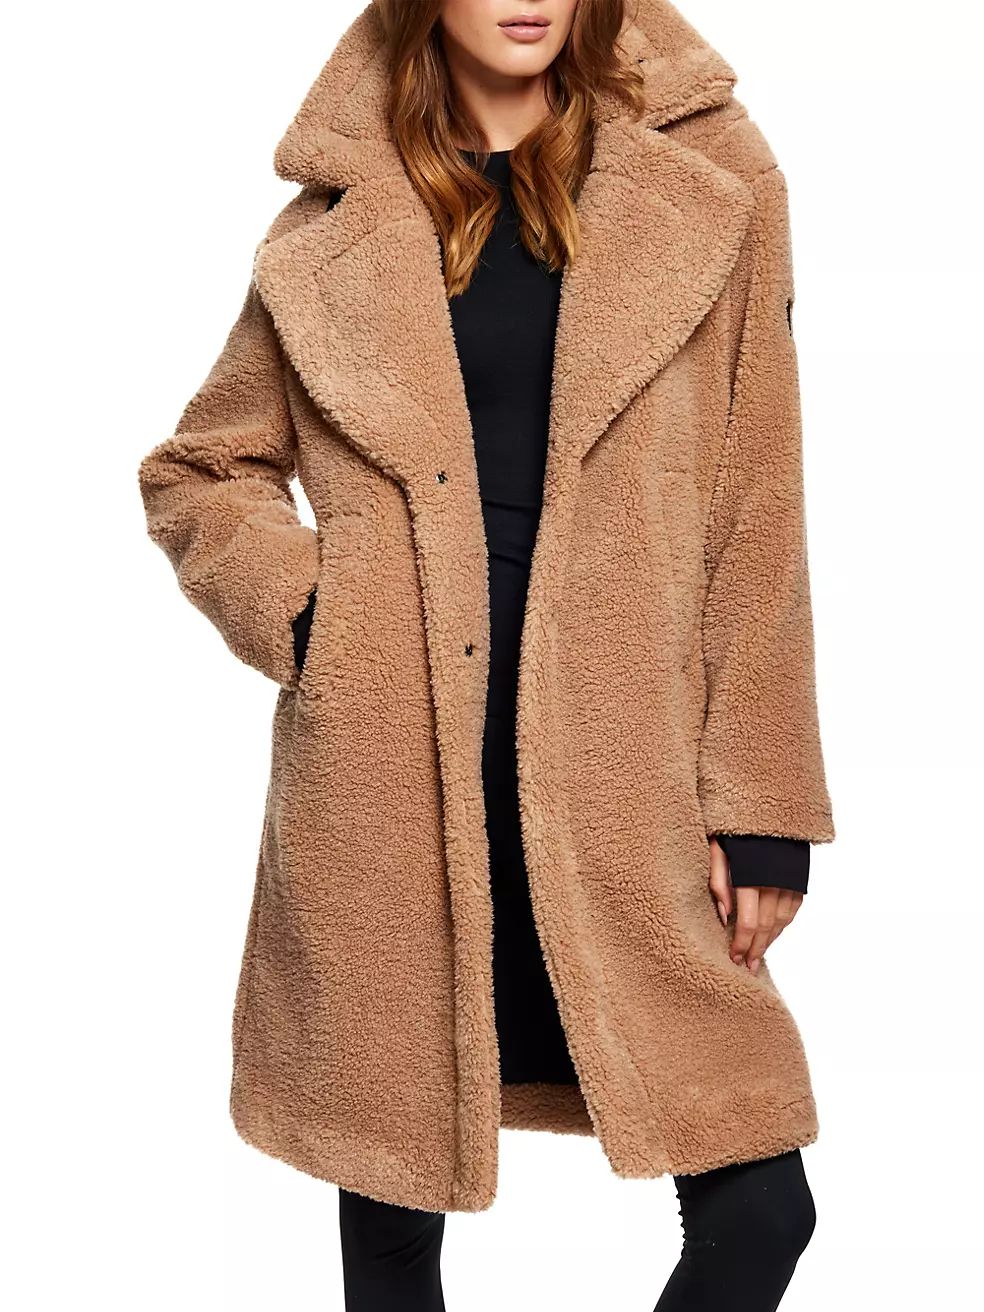 Sherpa Leather-Trimmed Coat | Saks Fifth Avenue